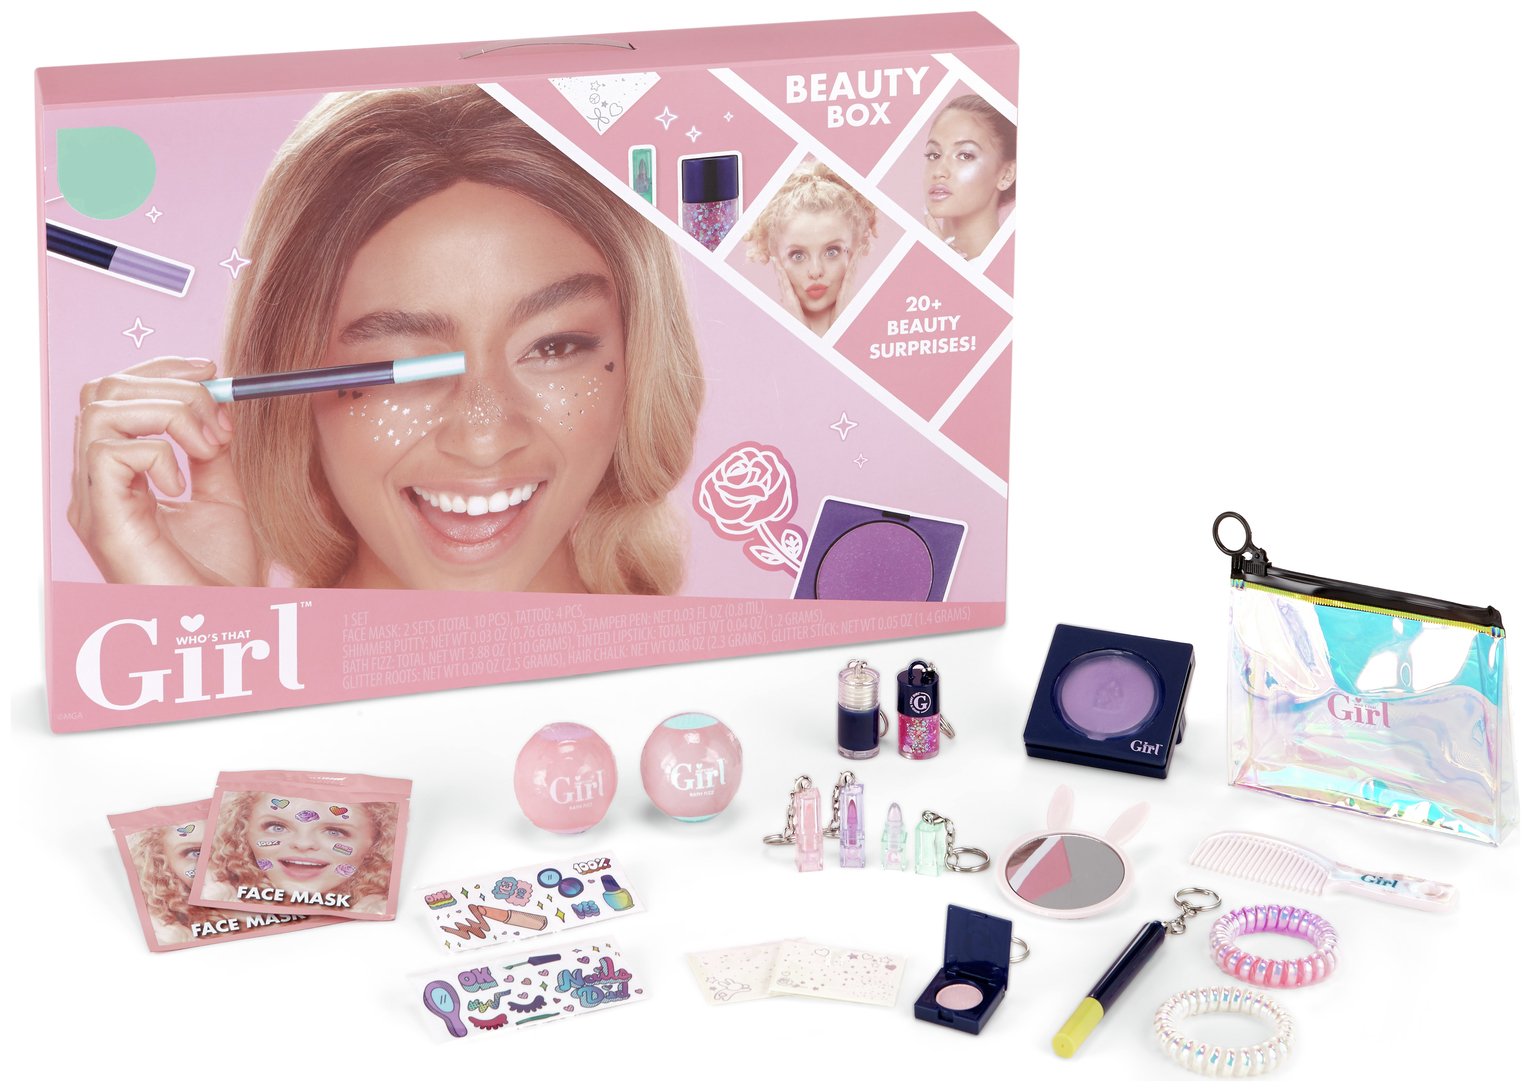 Who's that Girl Beauty Box